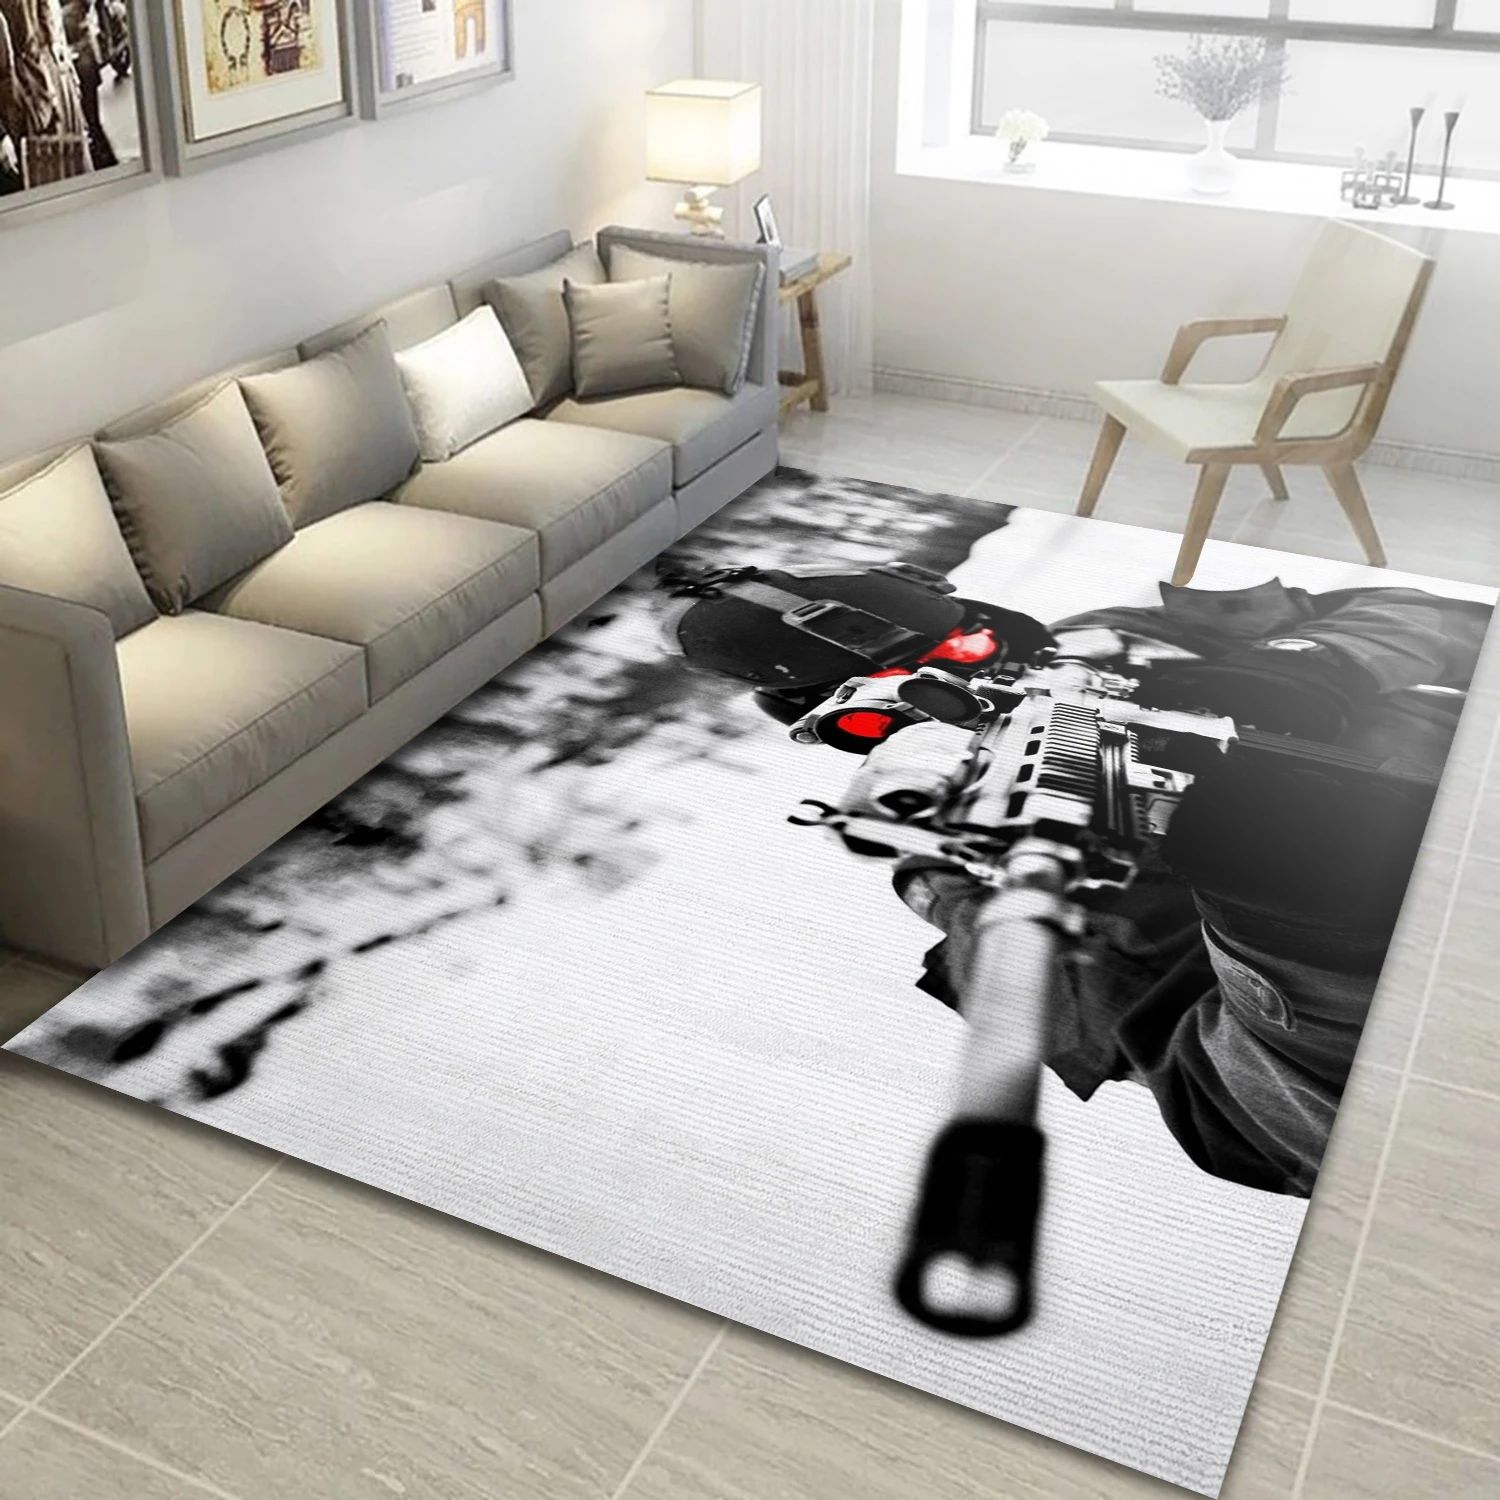 Call Of Duty Modern Warfare 572 Video Game Area Rug Area, Bedroom Rug - Family Gift US Decor - Indoor Outdoor Rugs